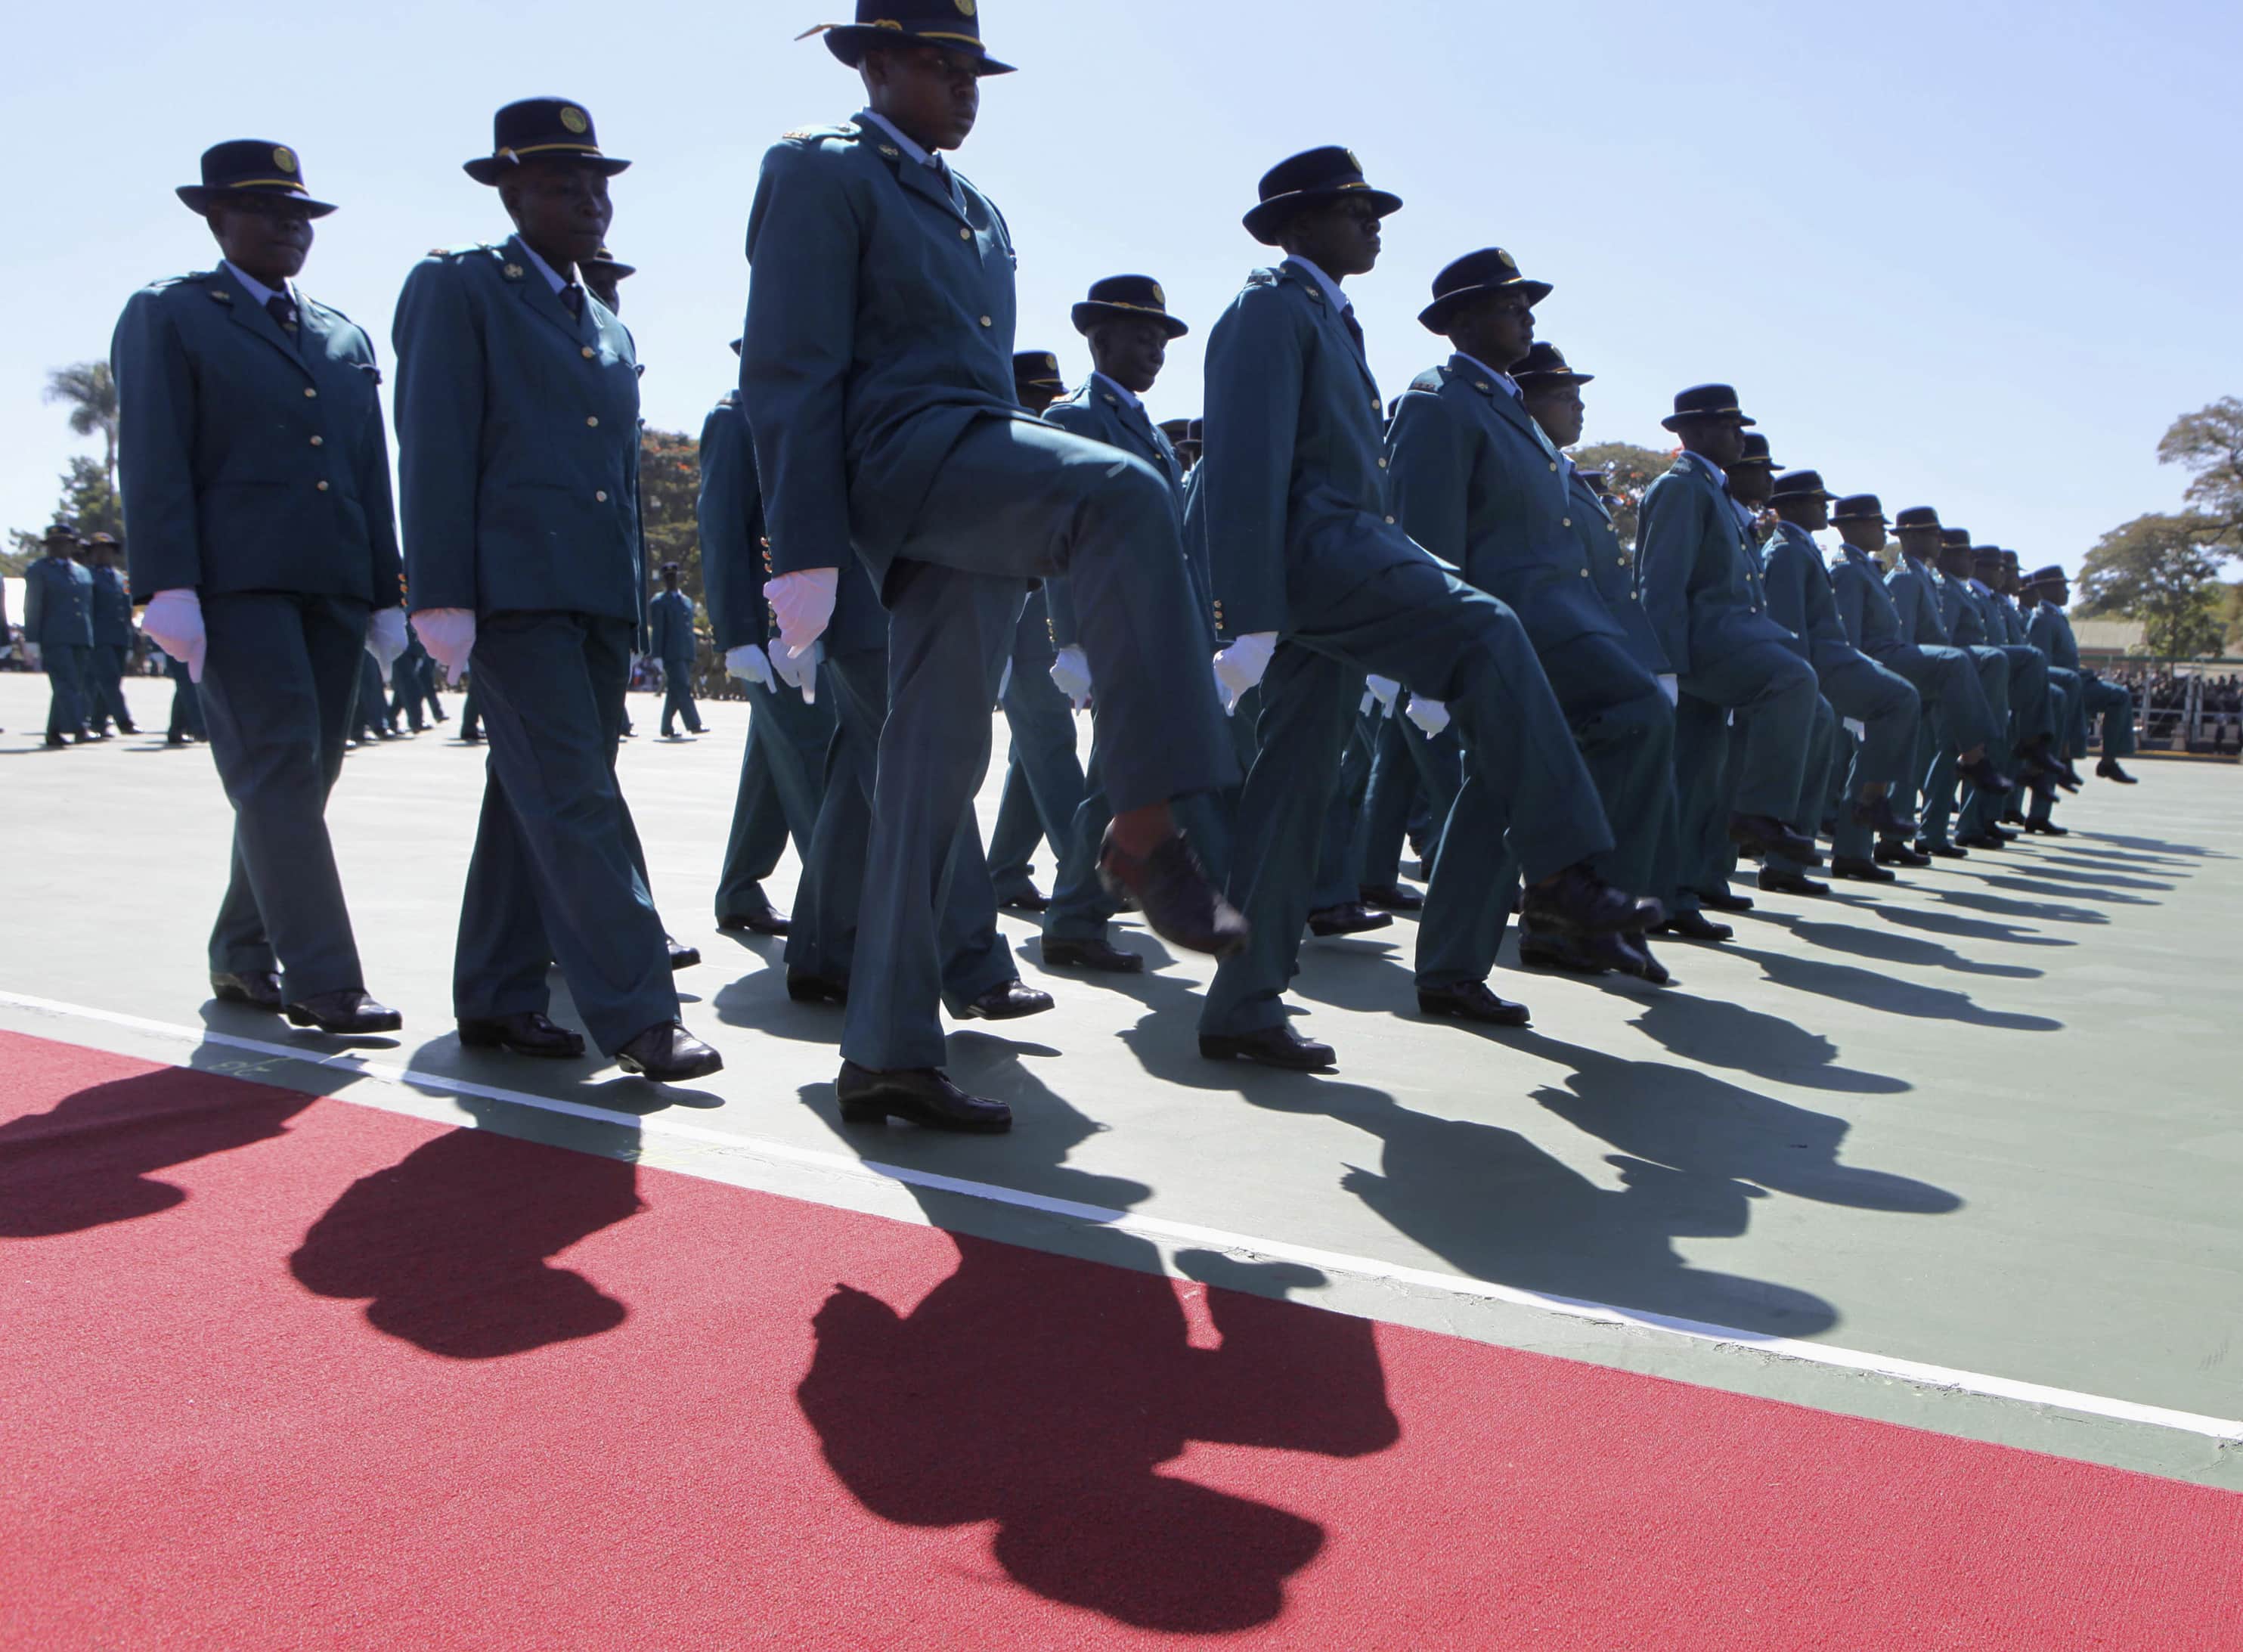 Police officers take part in a graduation ceremony for police recruits in Harare, 29 May 2014, REUTERS/Philimon Bulawayo